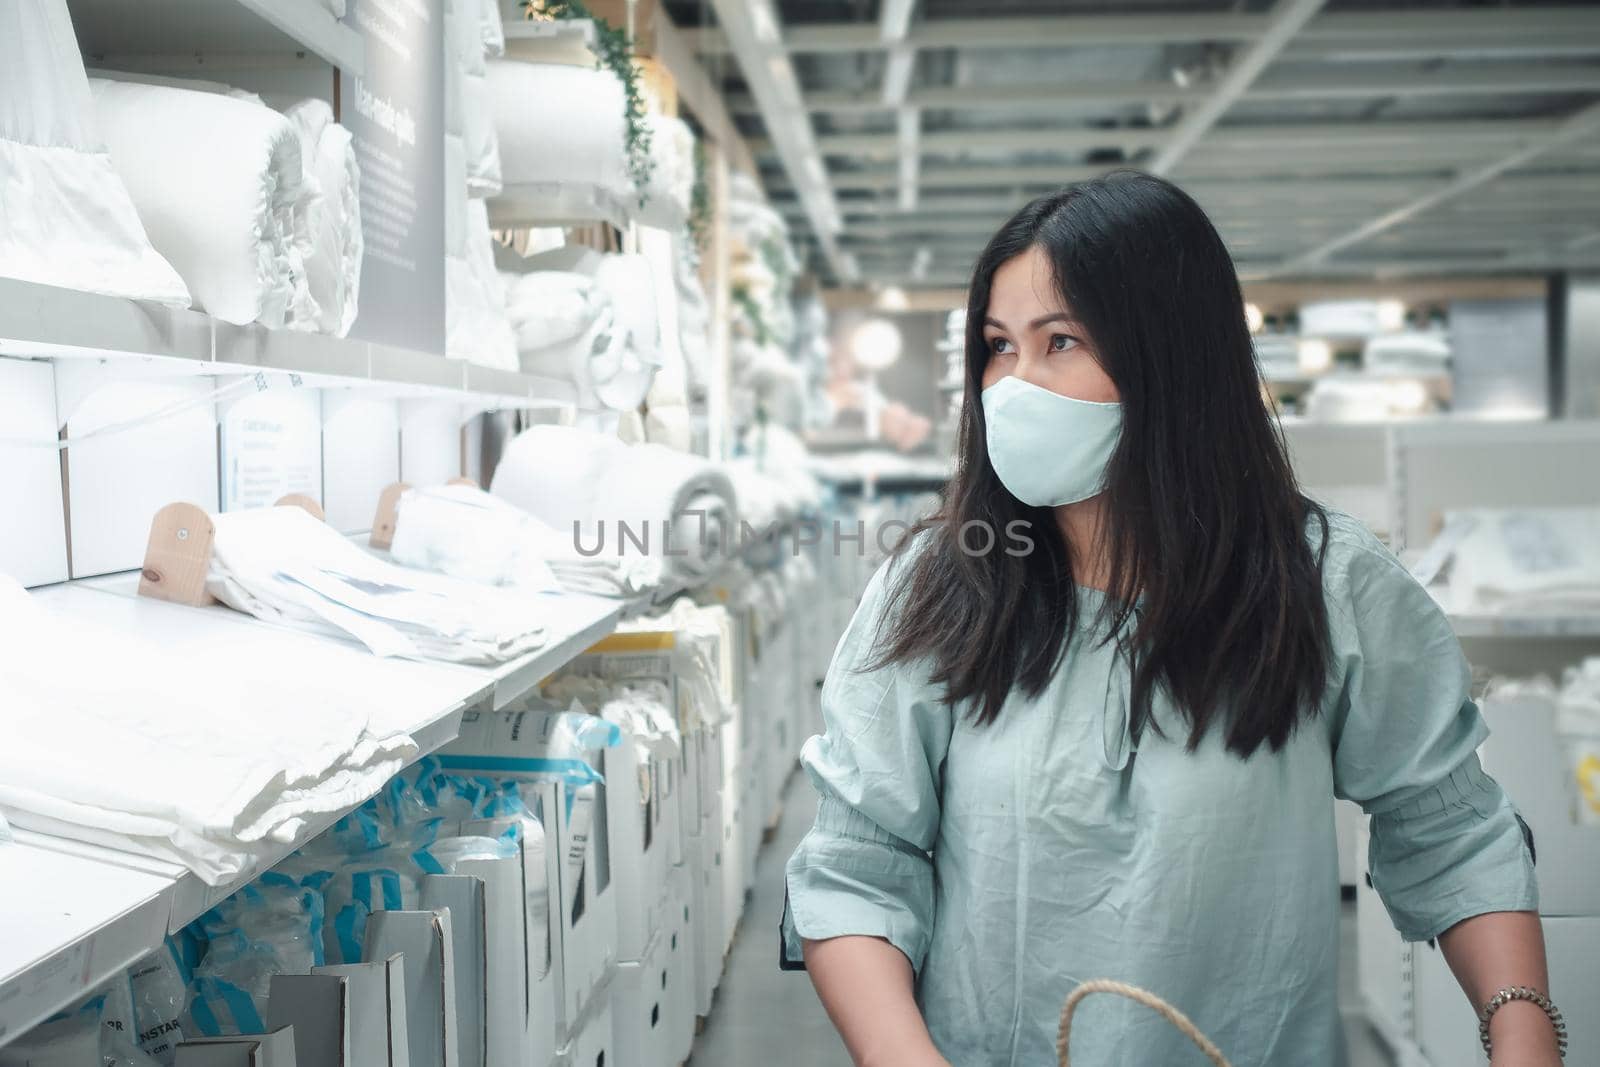 Customer Asian Woman Wearing Face Mask With Shopping Cart in Supermarket Department Store Shop While Choosing and Looking Goods on Shelf During Covid-19 Pandemic. Coronavirus Covid Situation 